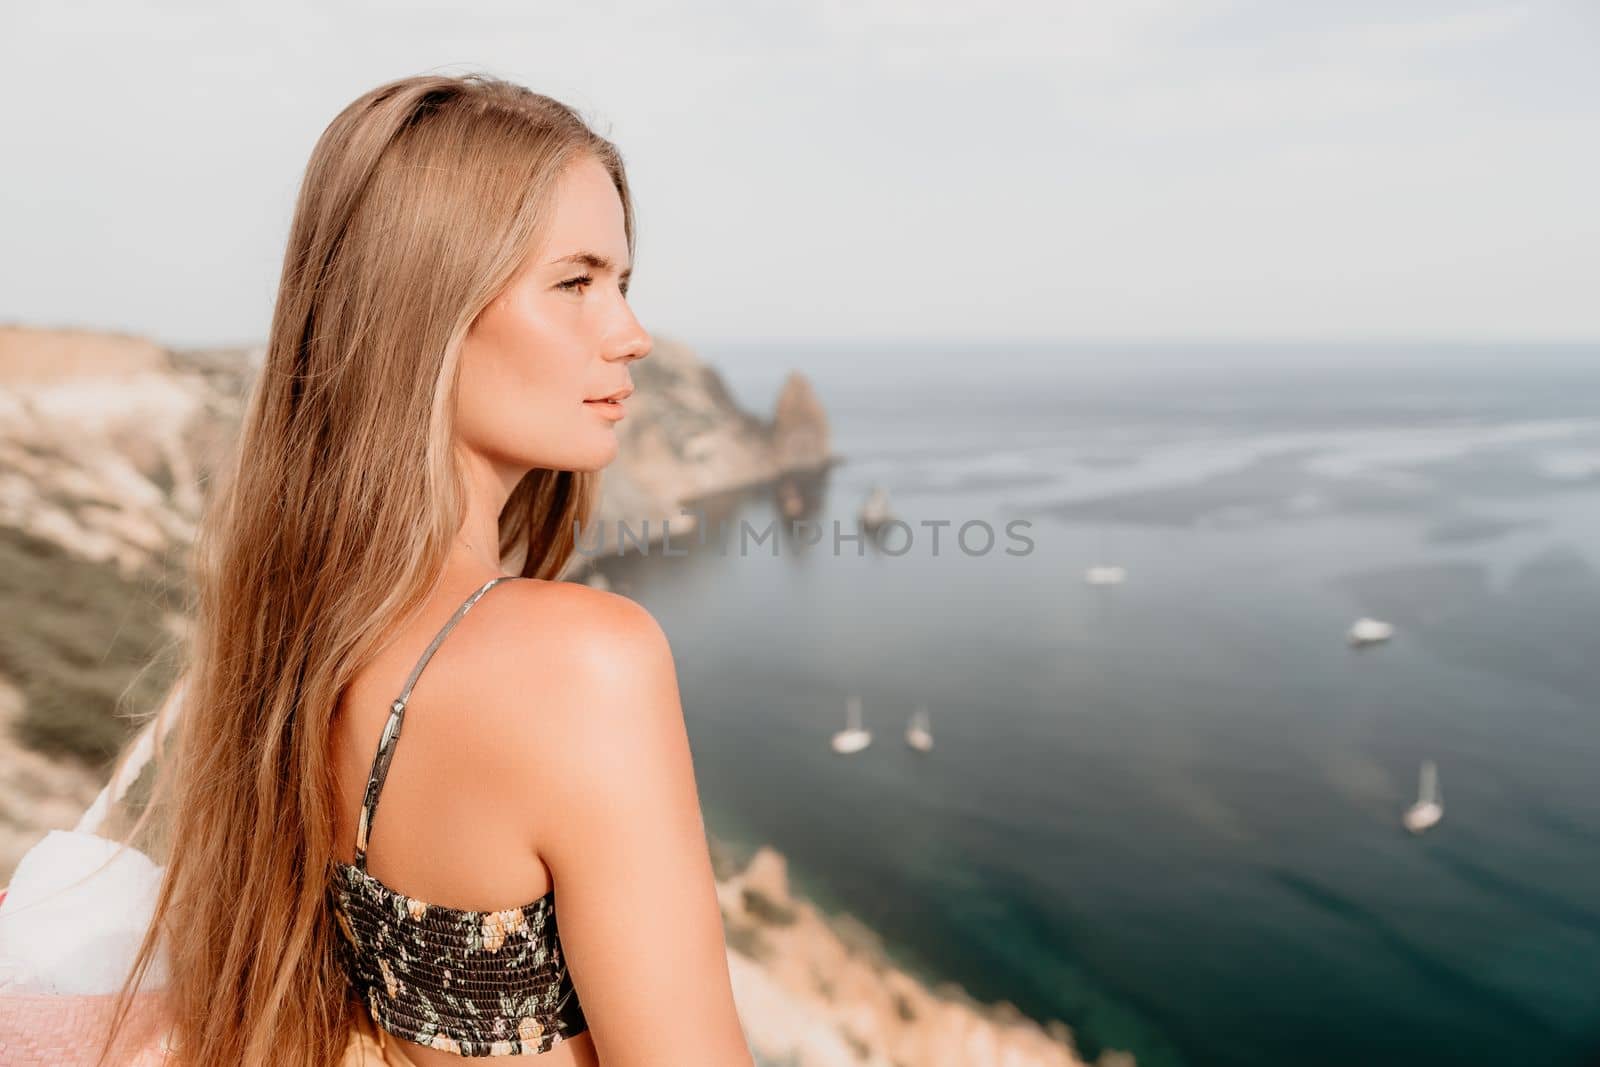 Woman travel sea. Happy tourist taking picture outdoors for memories. Woman traveler looks at the edge of the cliff on the sea bay of mountains, sharing travel adventure journey.